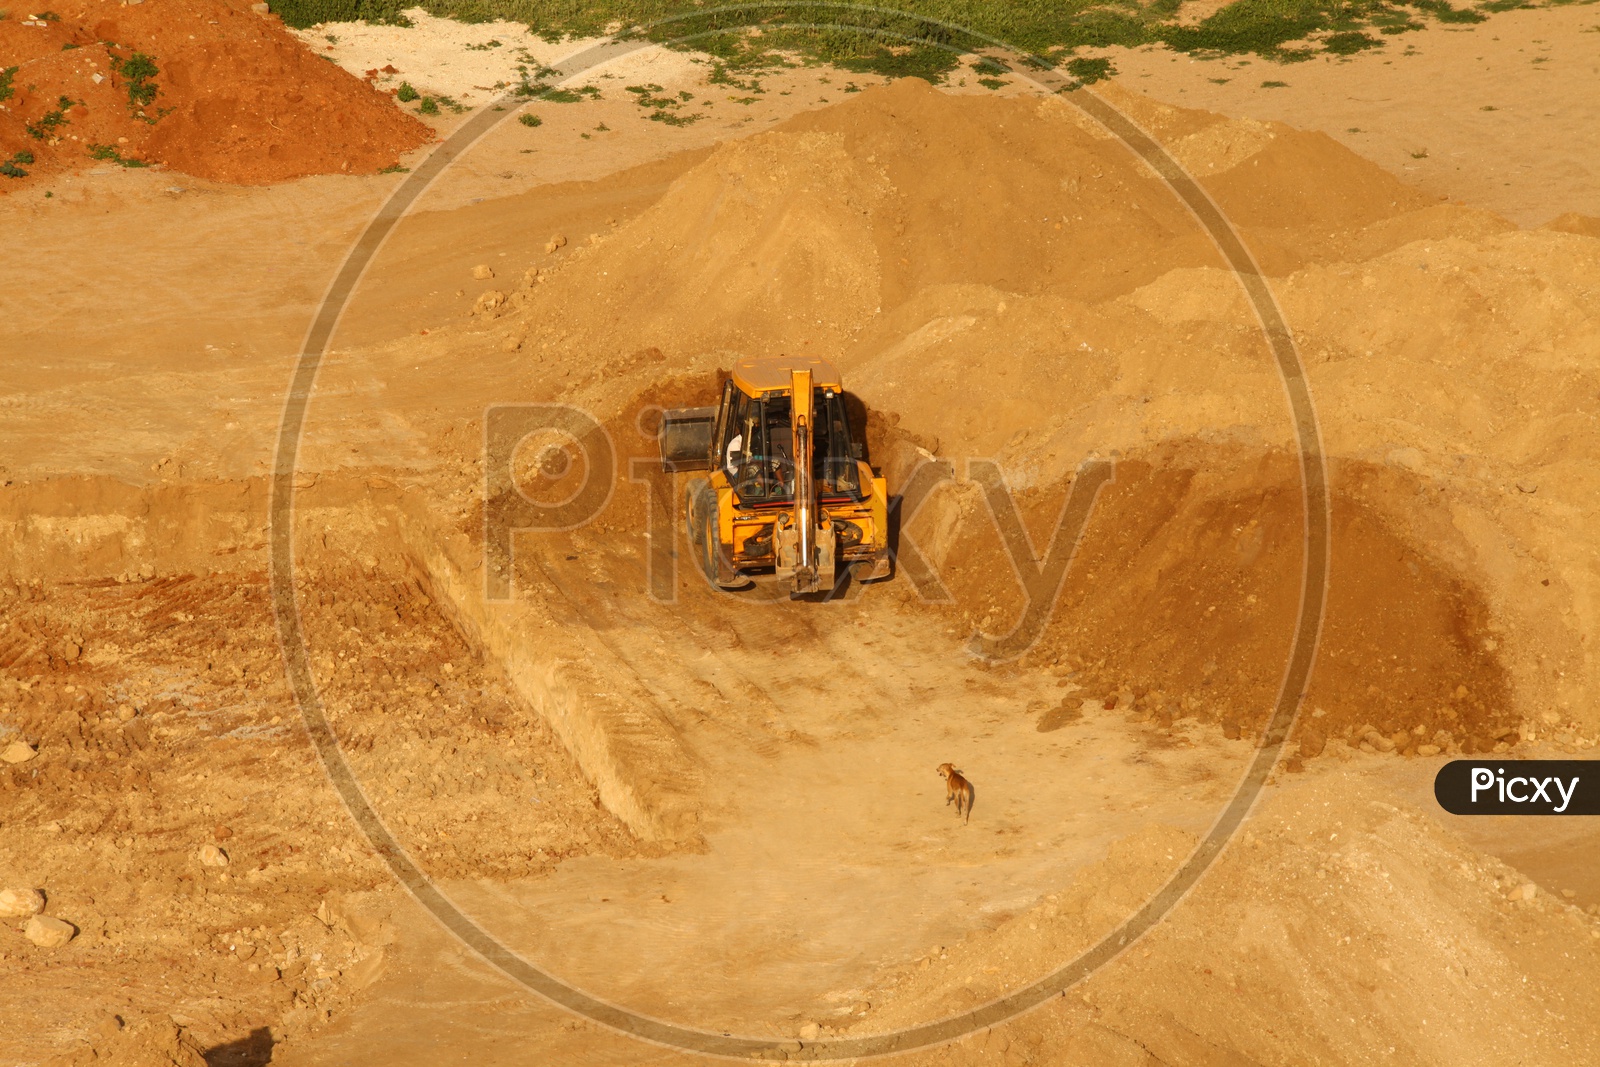 Earth Movers Working on a hill top